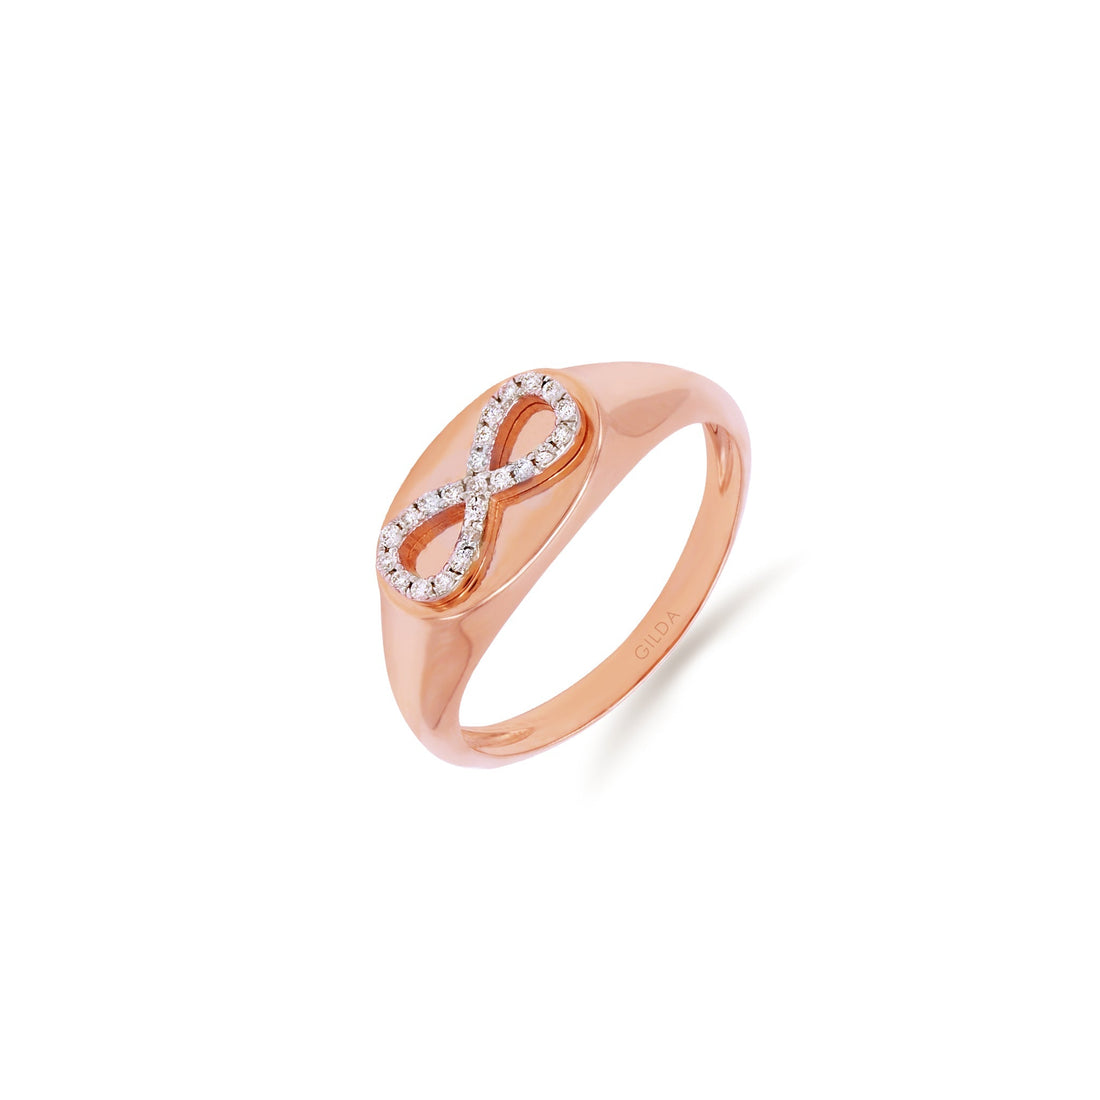 Jewelry Minnies | Diamond Ring | 0.09 Cts. | 14K Gold - Rose / 6 / Diamonds - ring Zengoda Shop online from